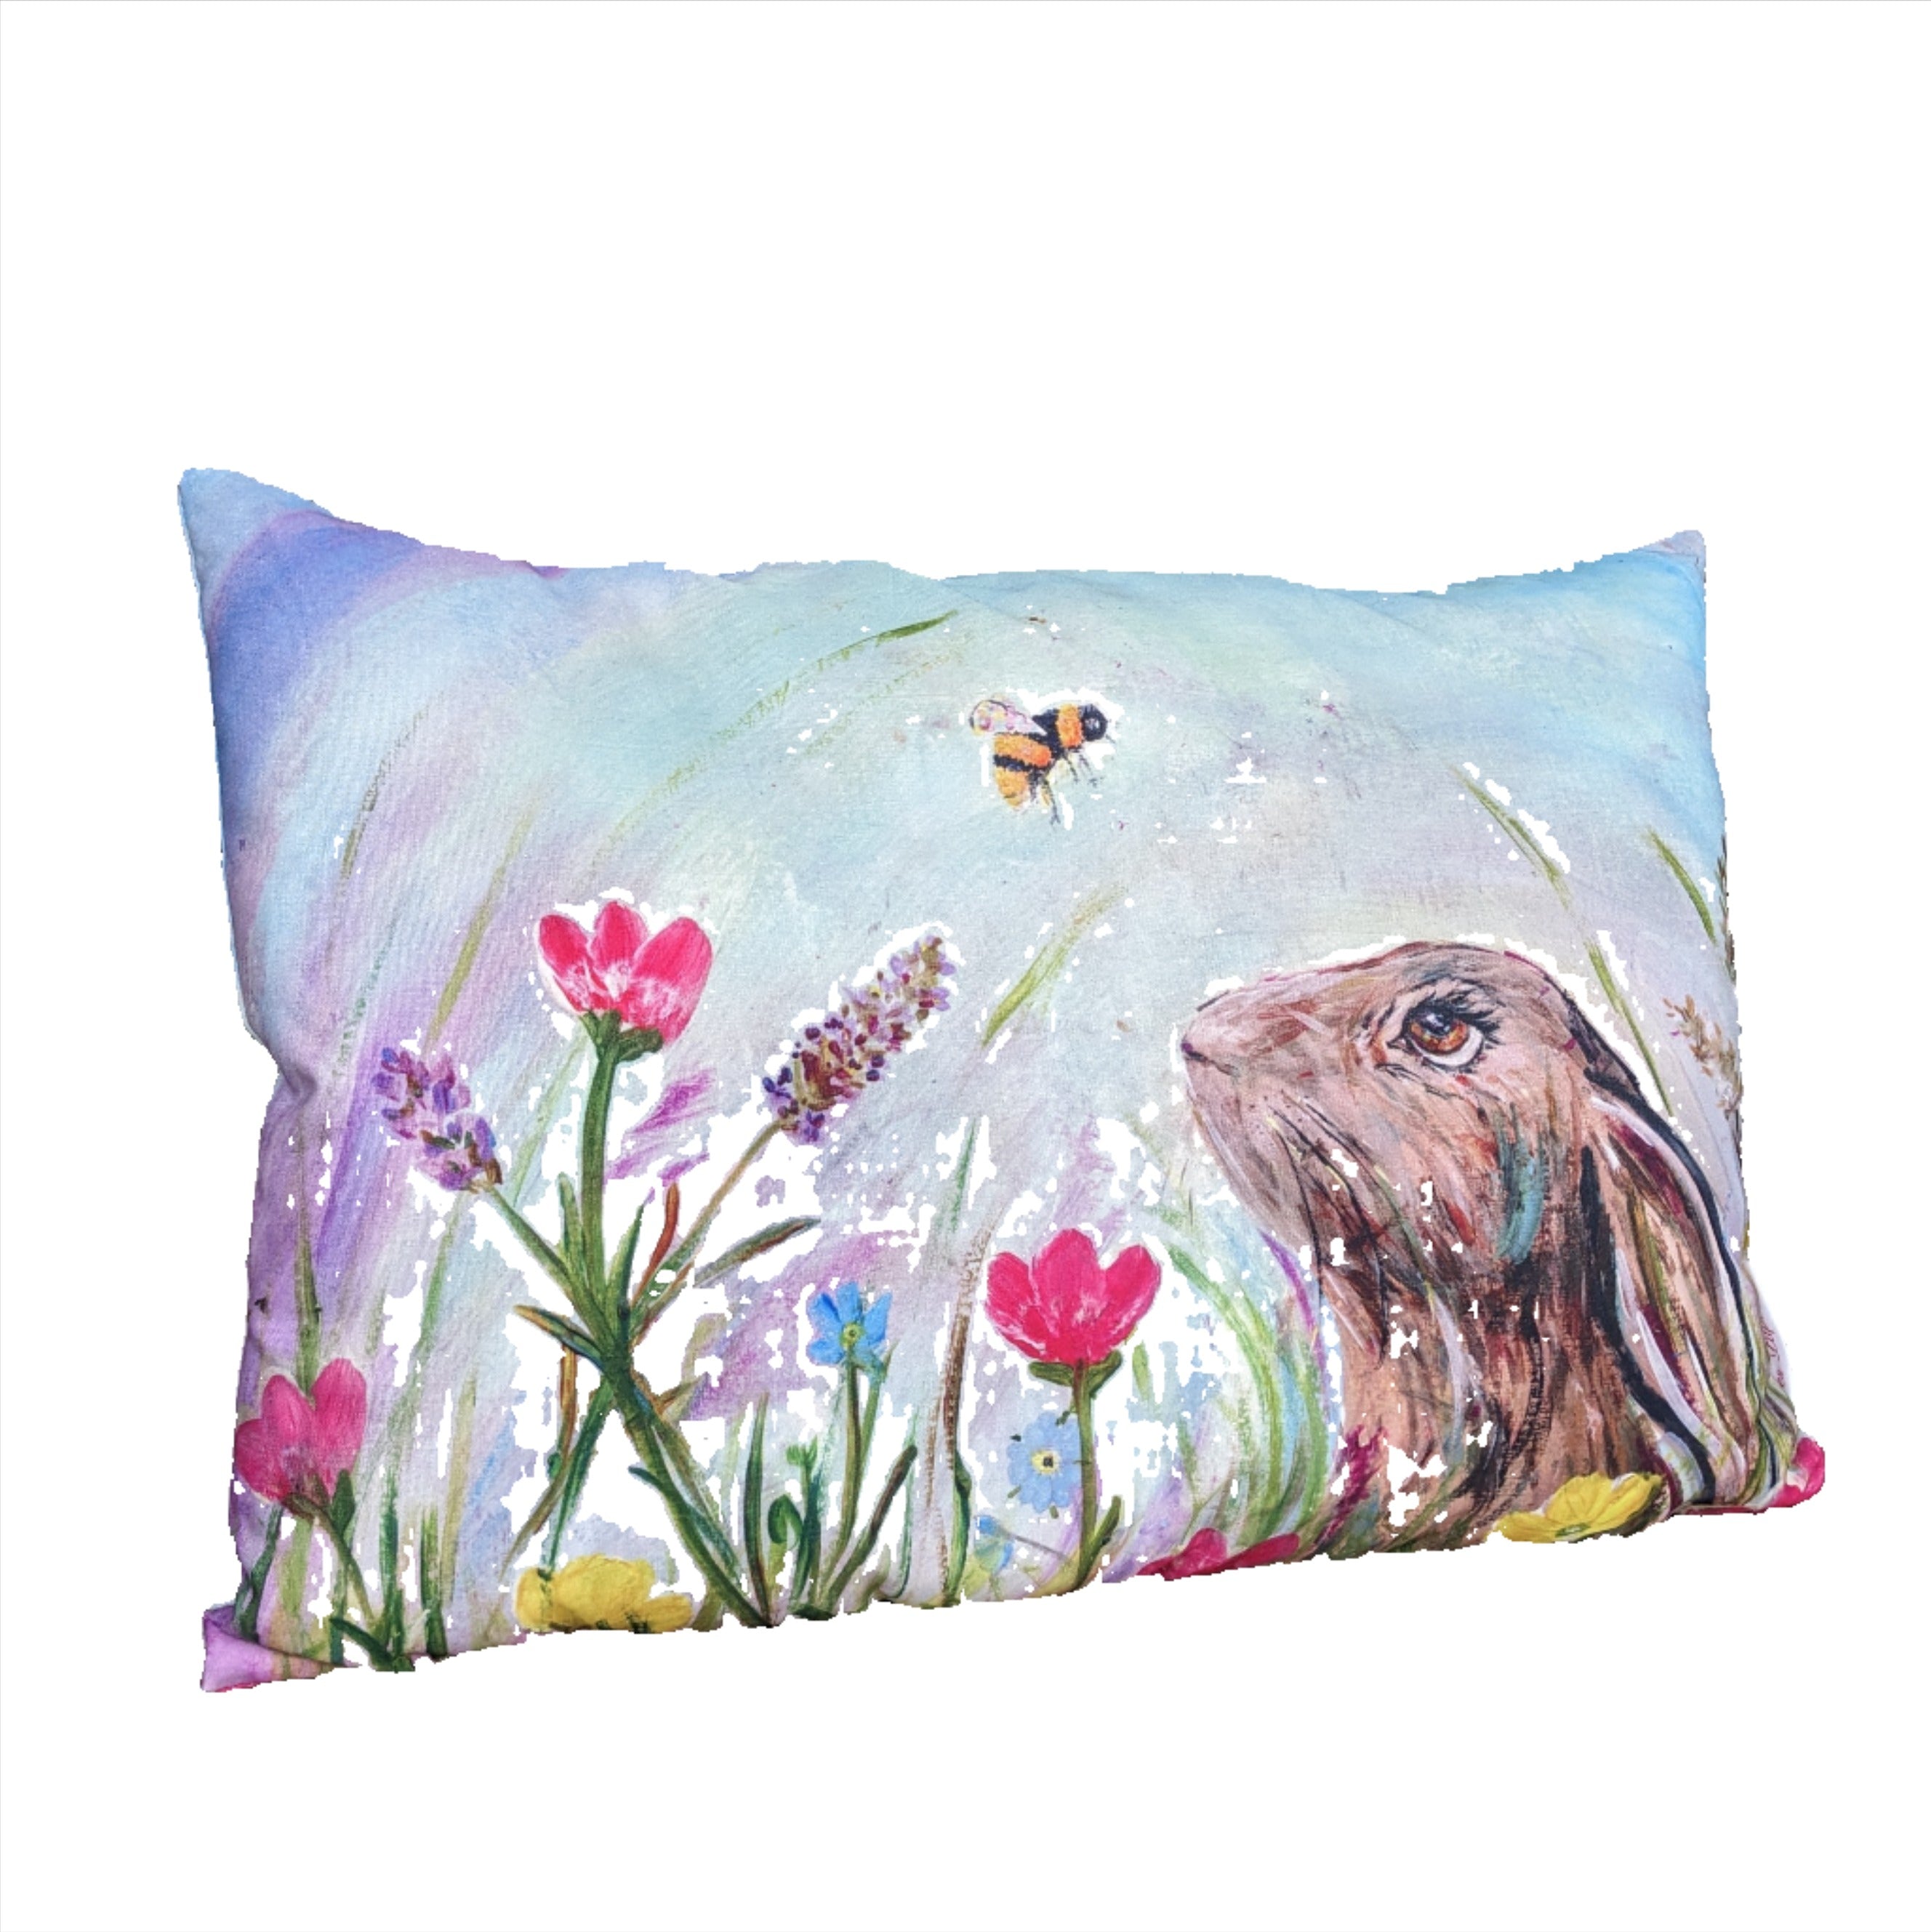 outdoor cushion. made with eco-fabric. colourful hare and bee print by Caroline Dilworth. Fermanagh Artist